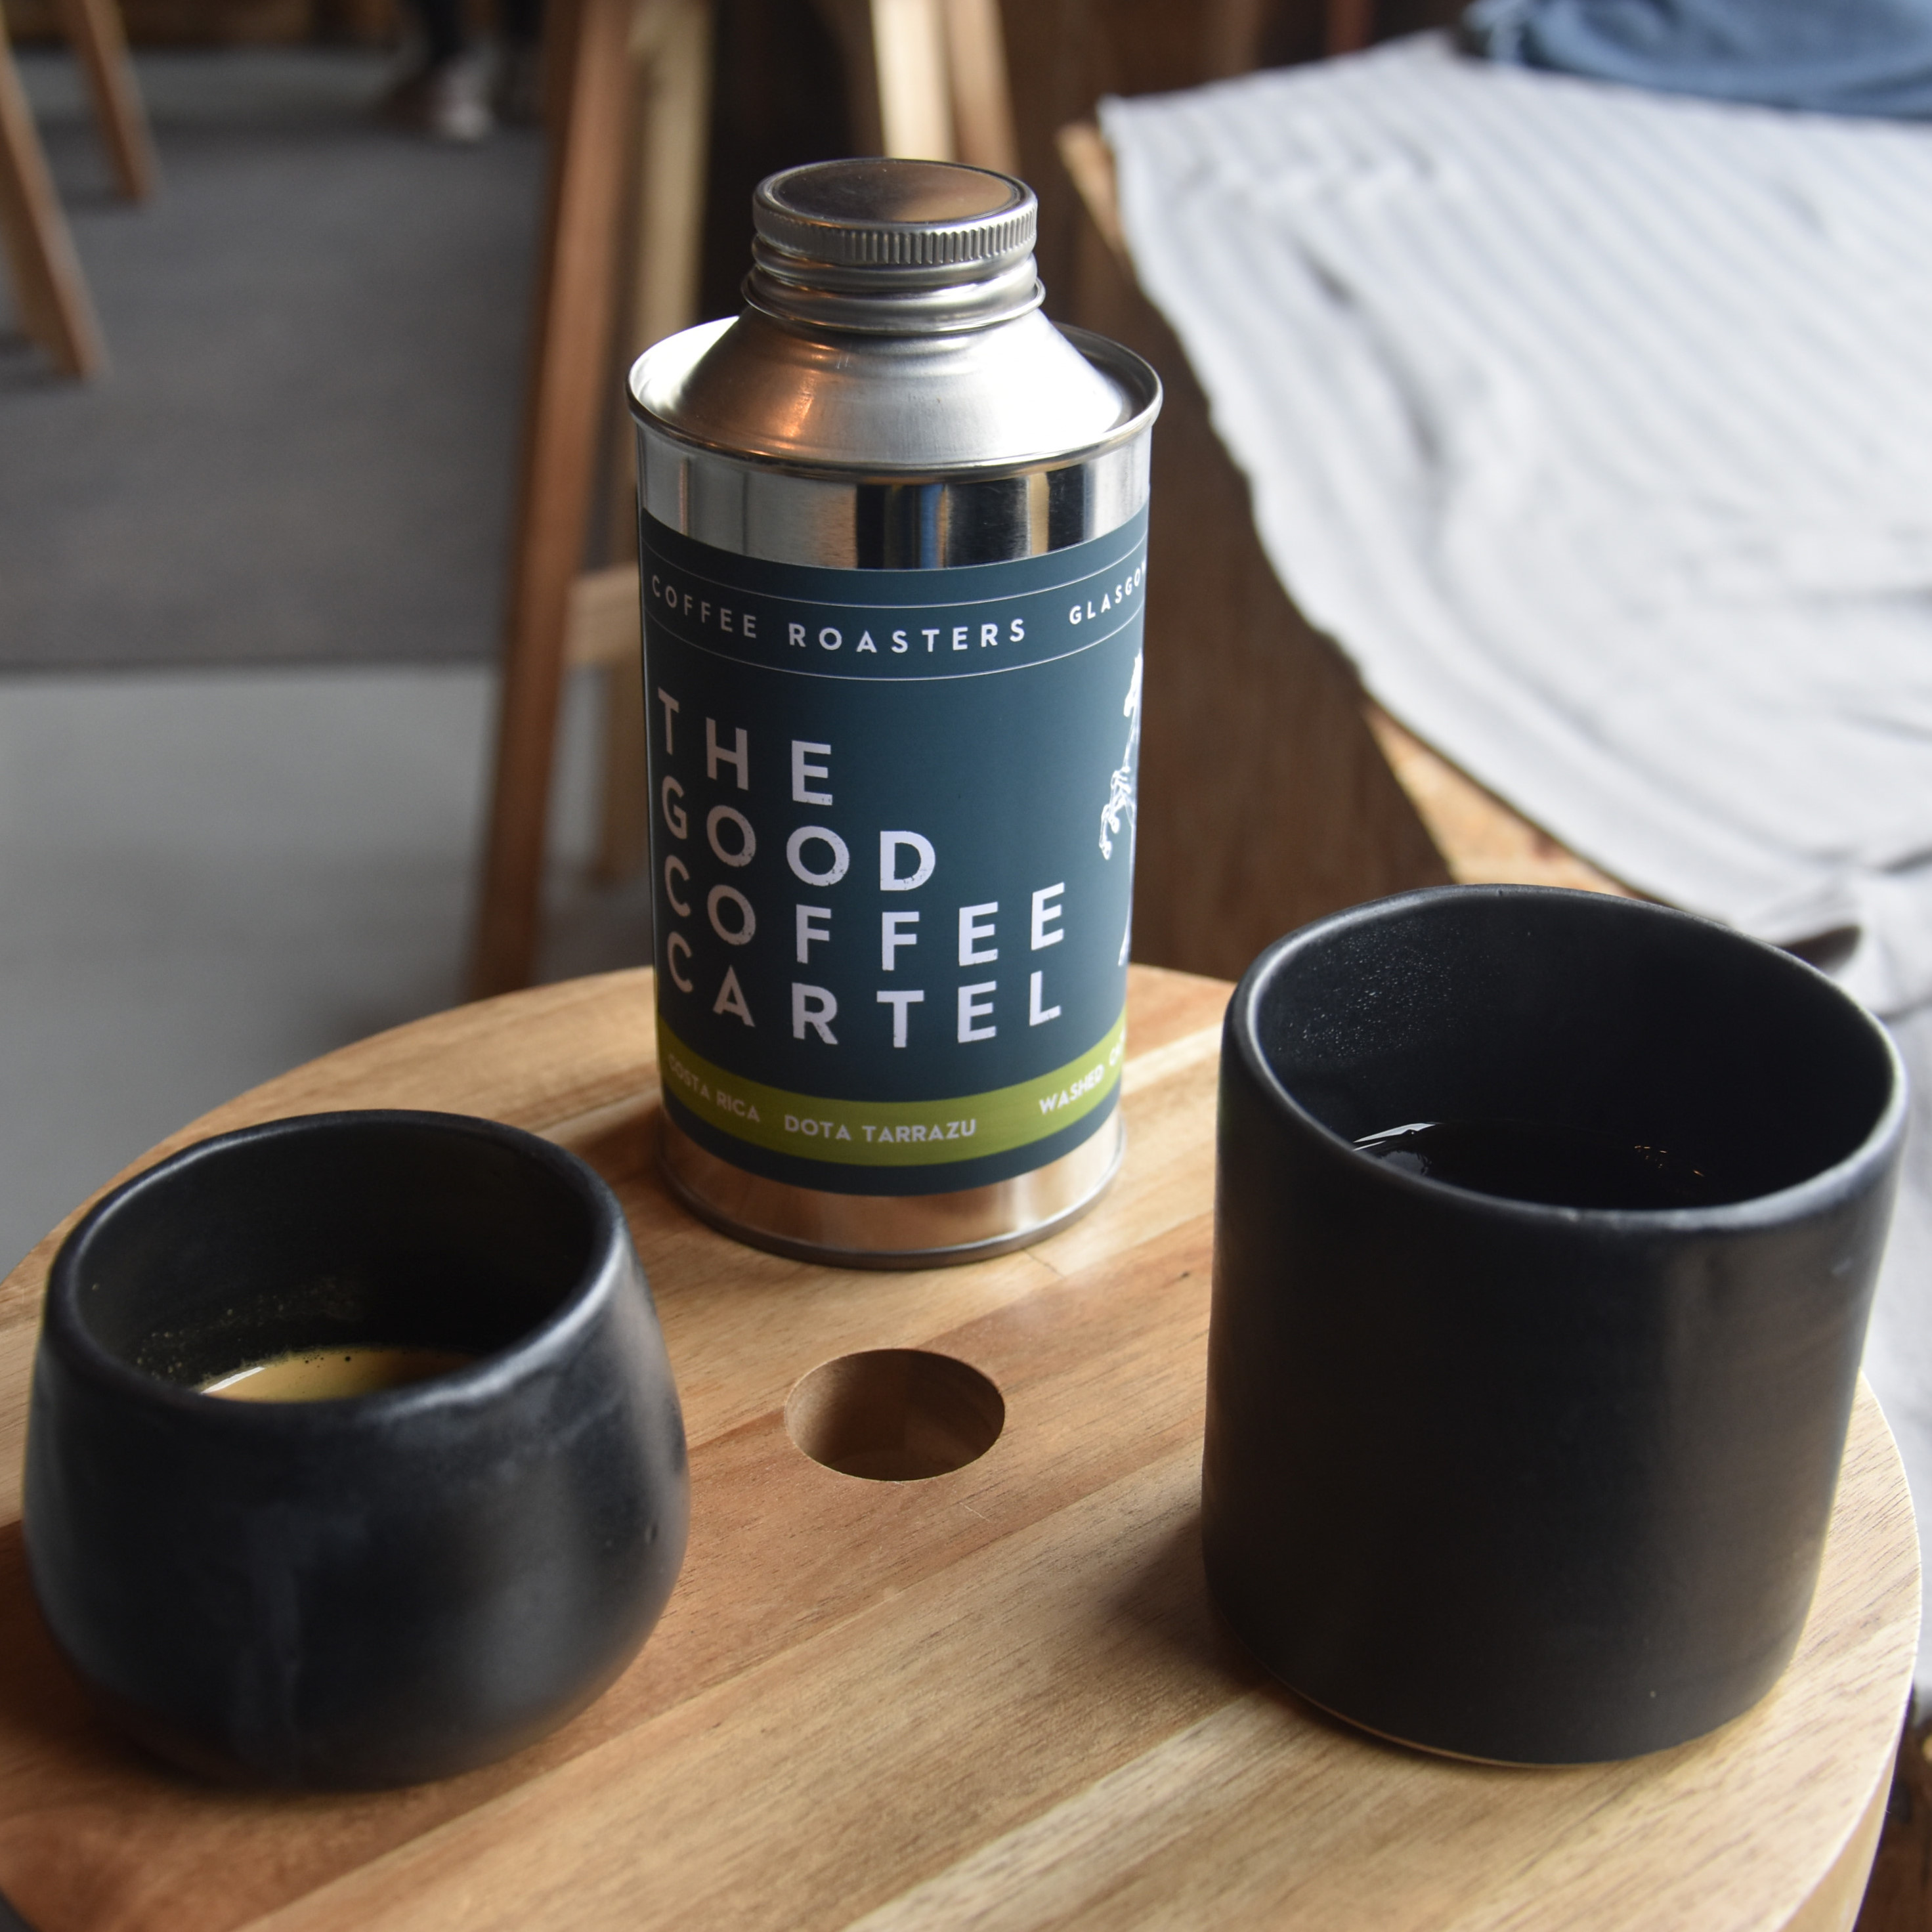 My espresso and batch-brew, both served in ceramic cups, handmade on-site at The Good Coffee Cartel, with a tin of the Costa Rican single-origin beans behind .